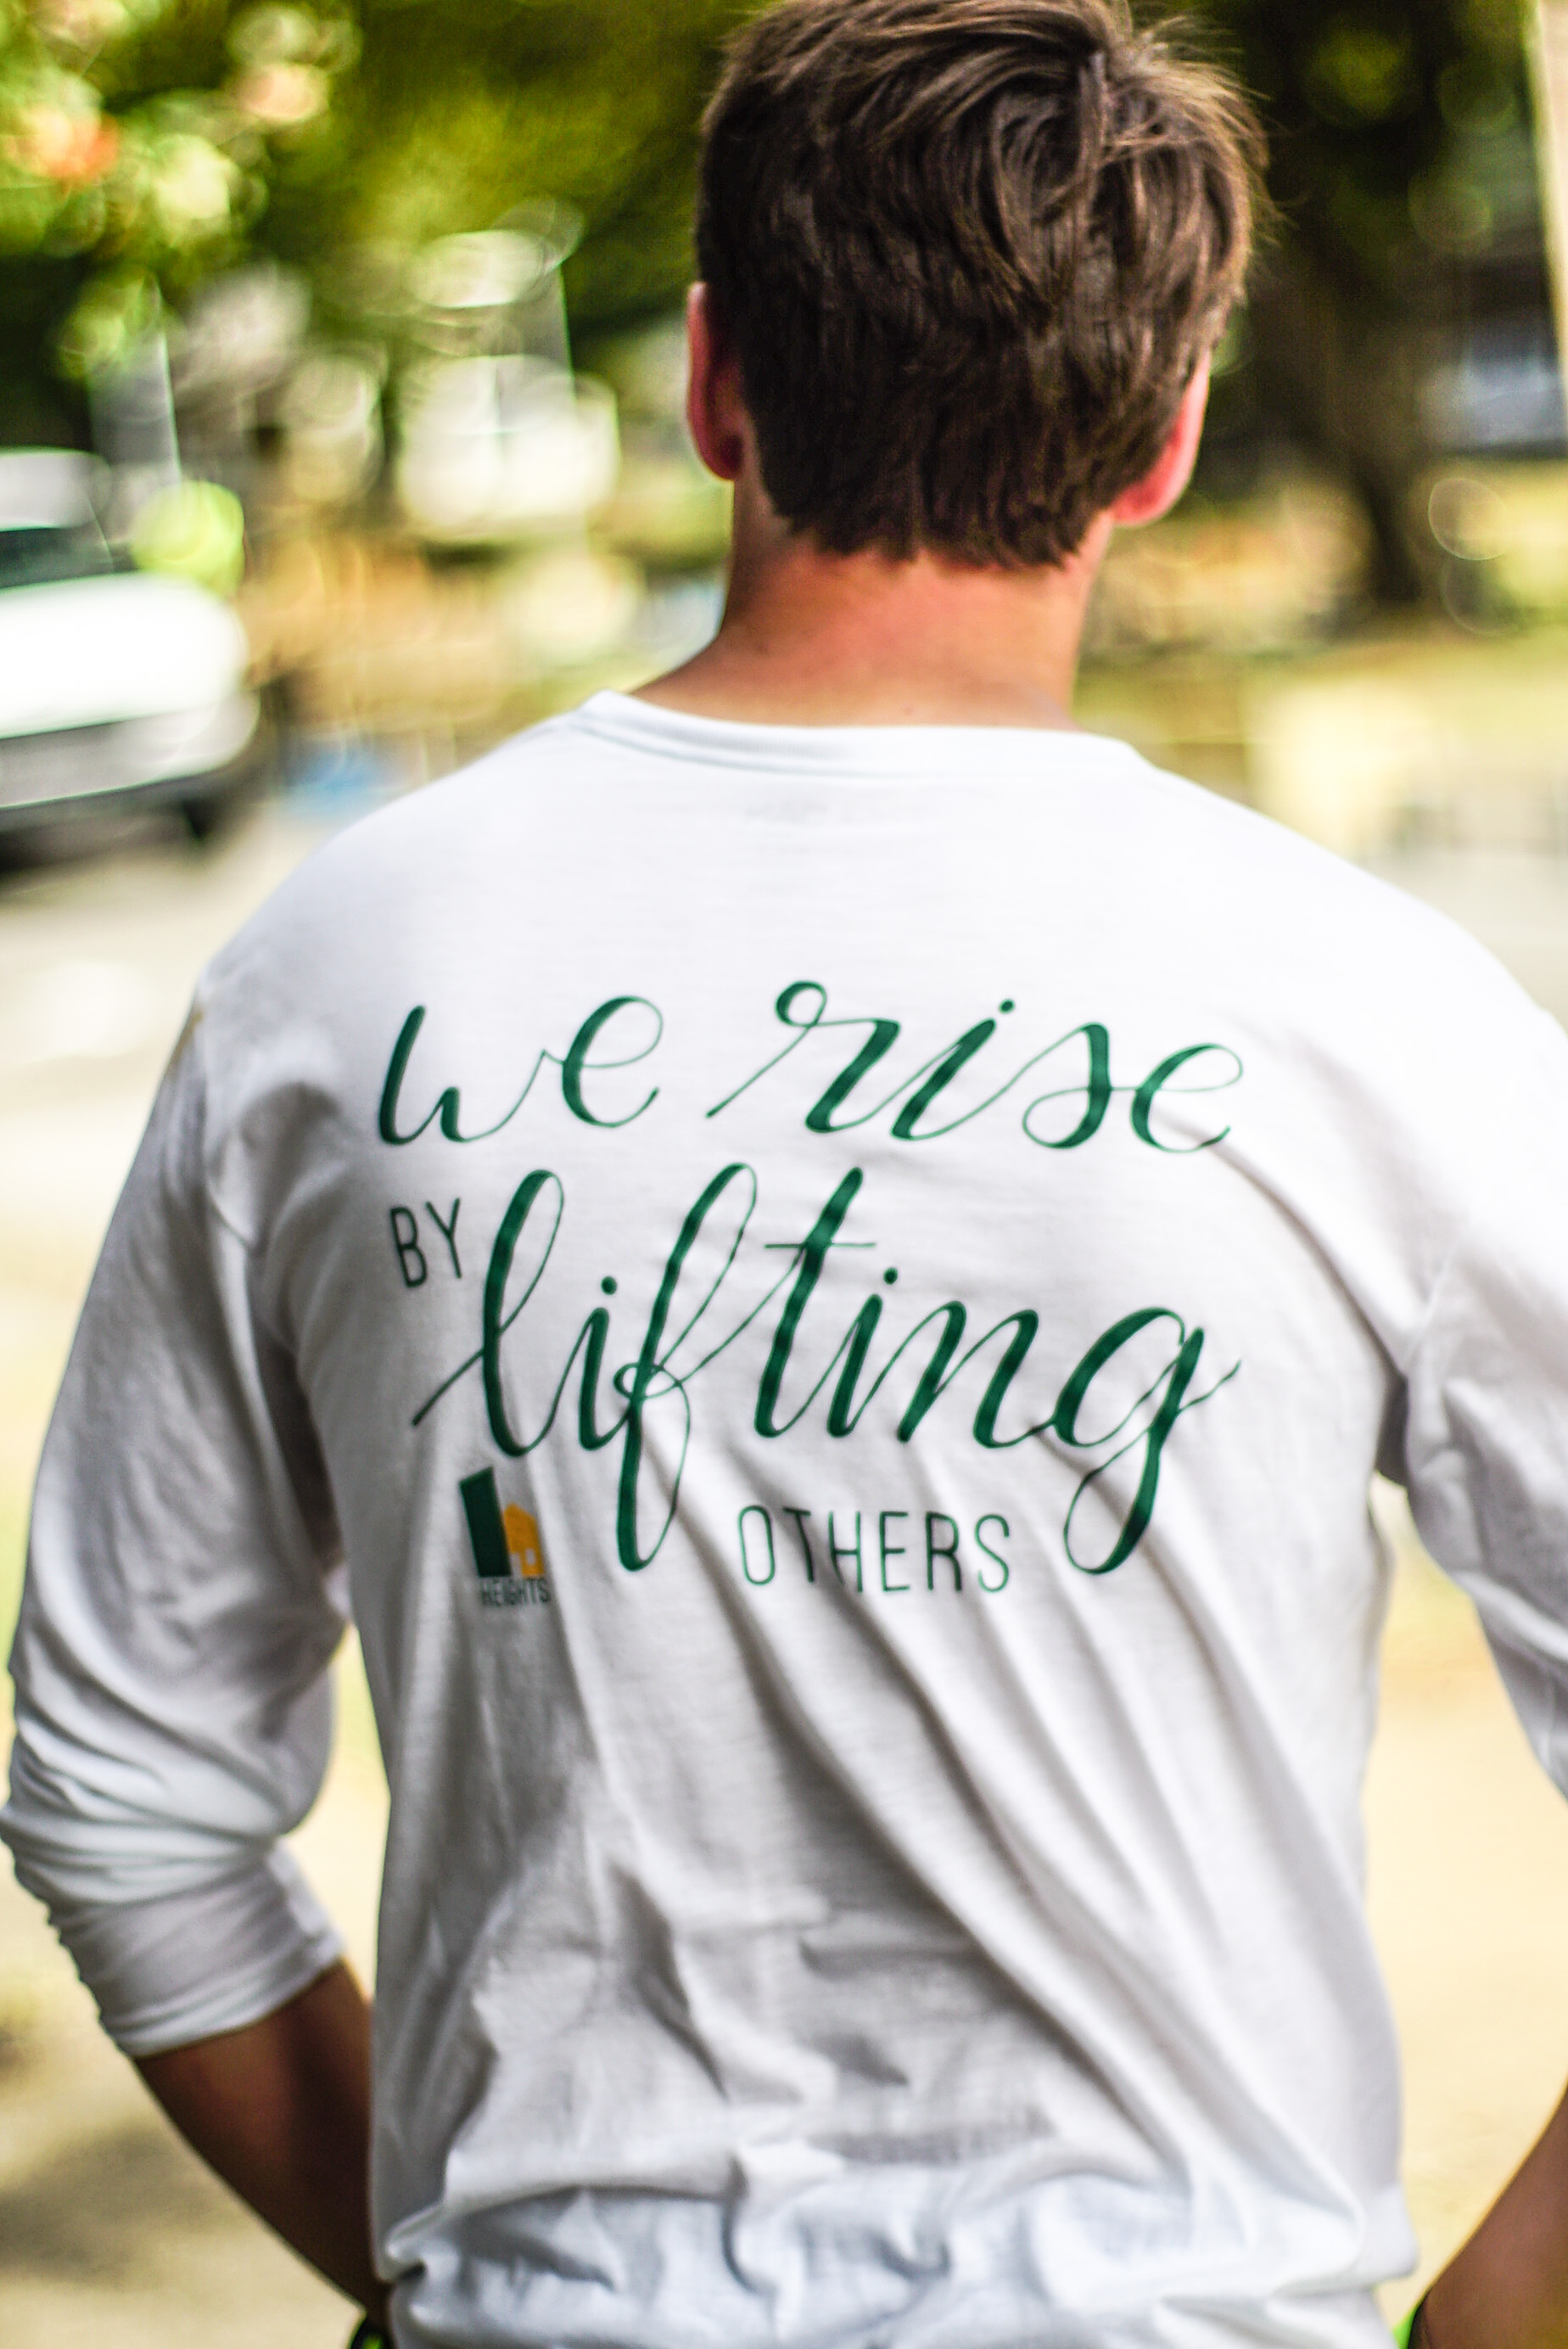 back of t-shirt that reads "we rise by lifting others"